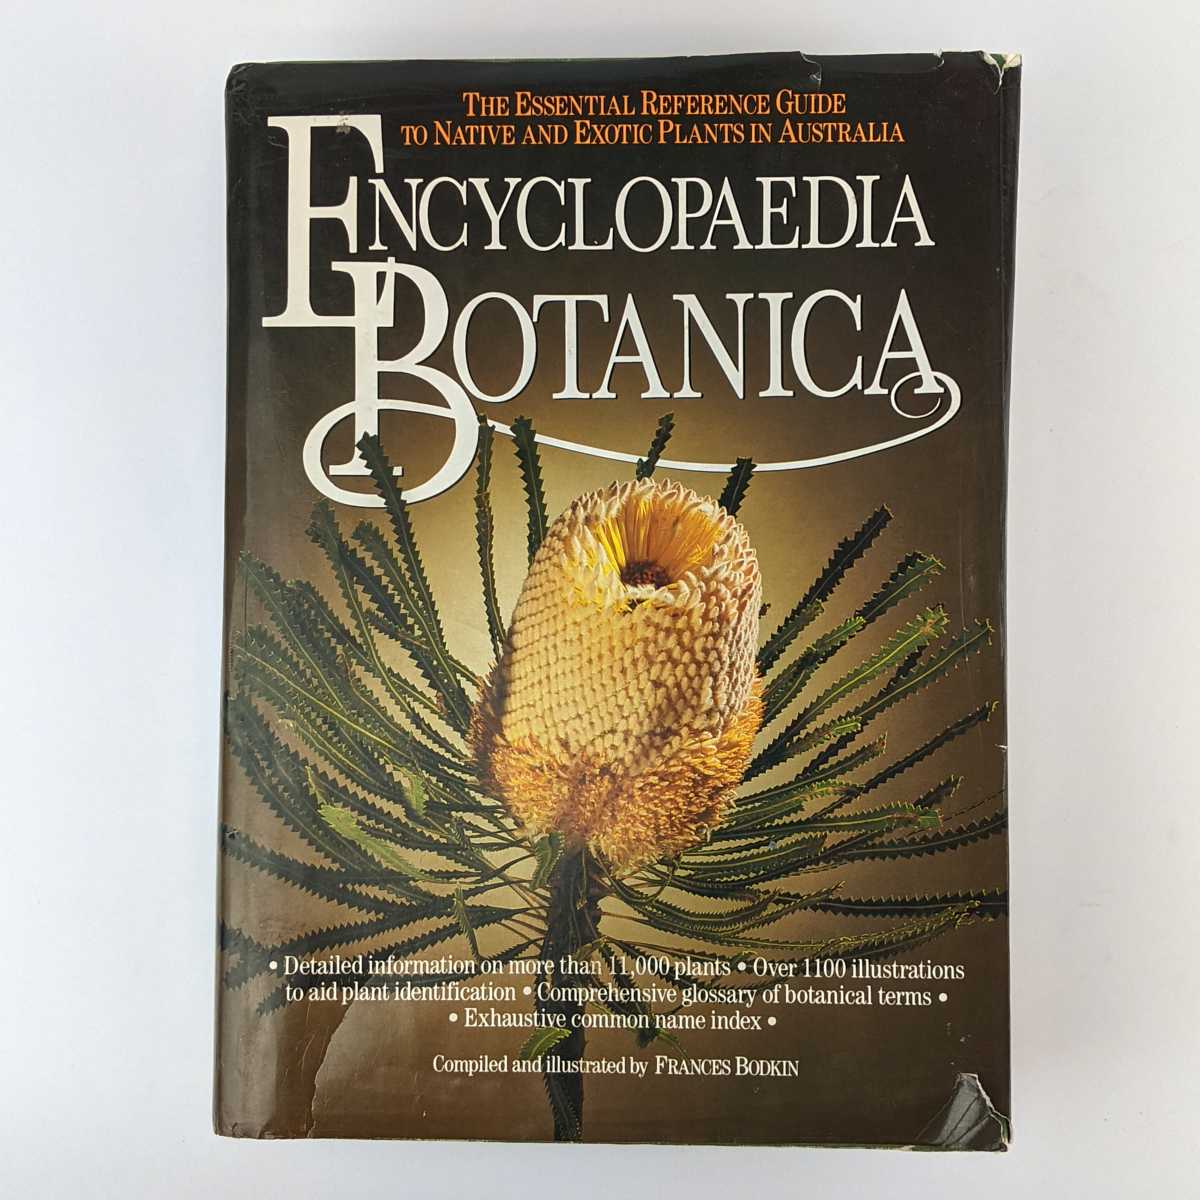 Frances Bodkin - Encyclopaedia Botanica: The Essential Reference Guide to Native and Exotic Plants in Australia